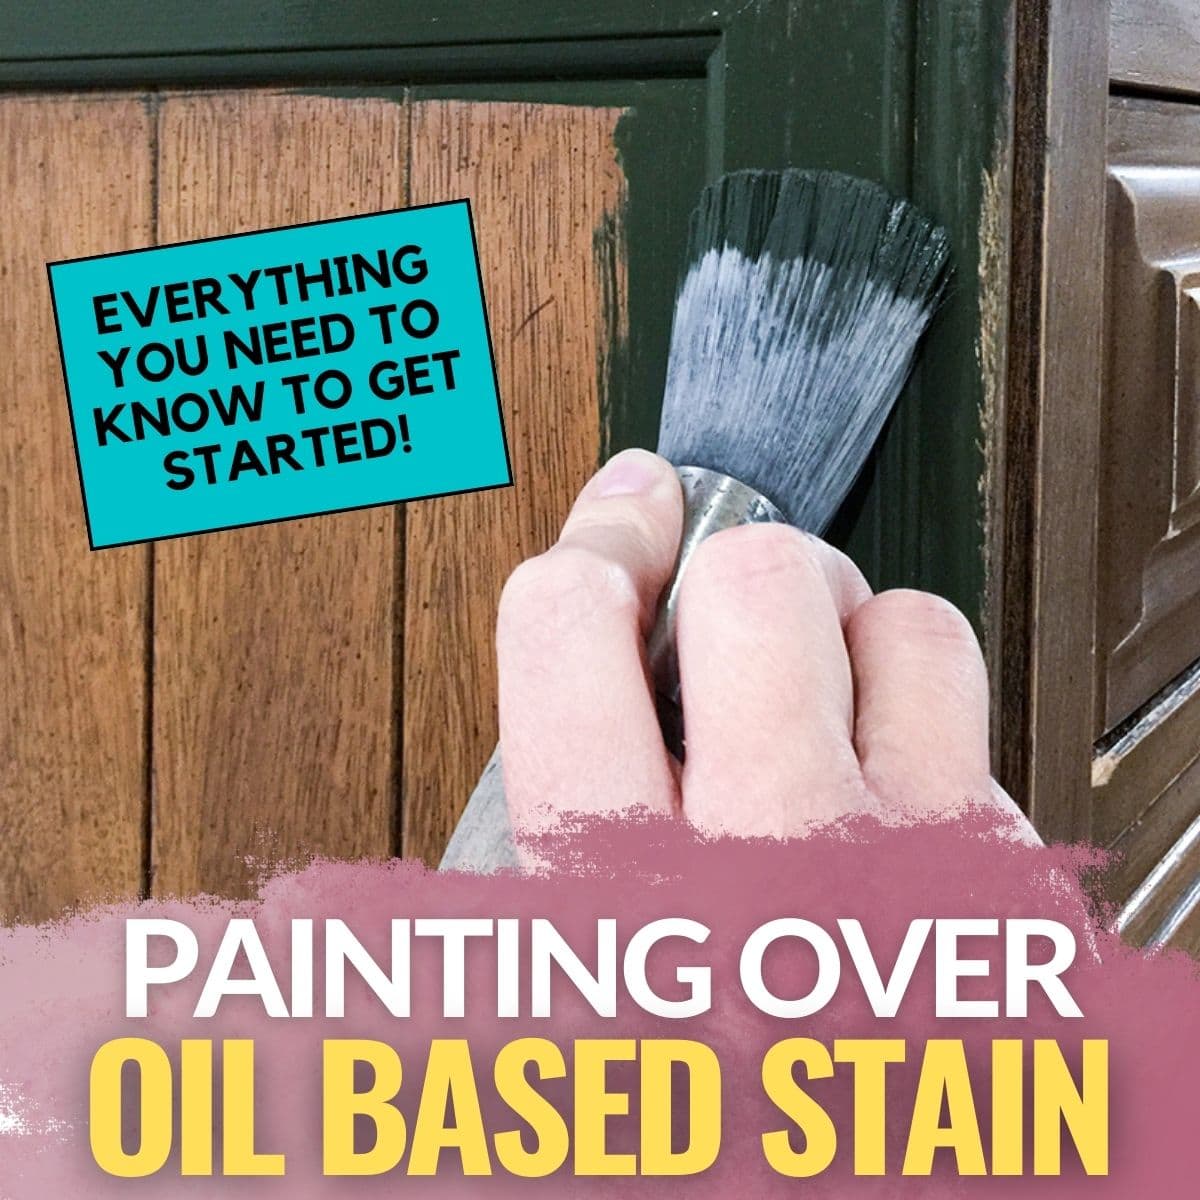 Painting Over Oil Based Stain